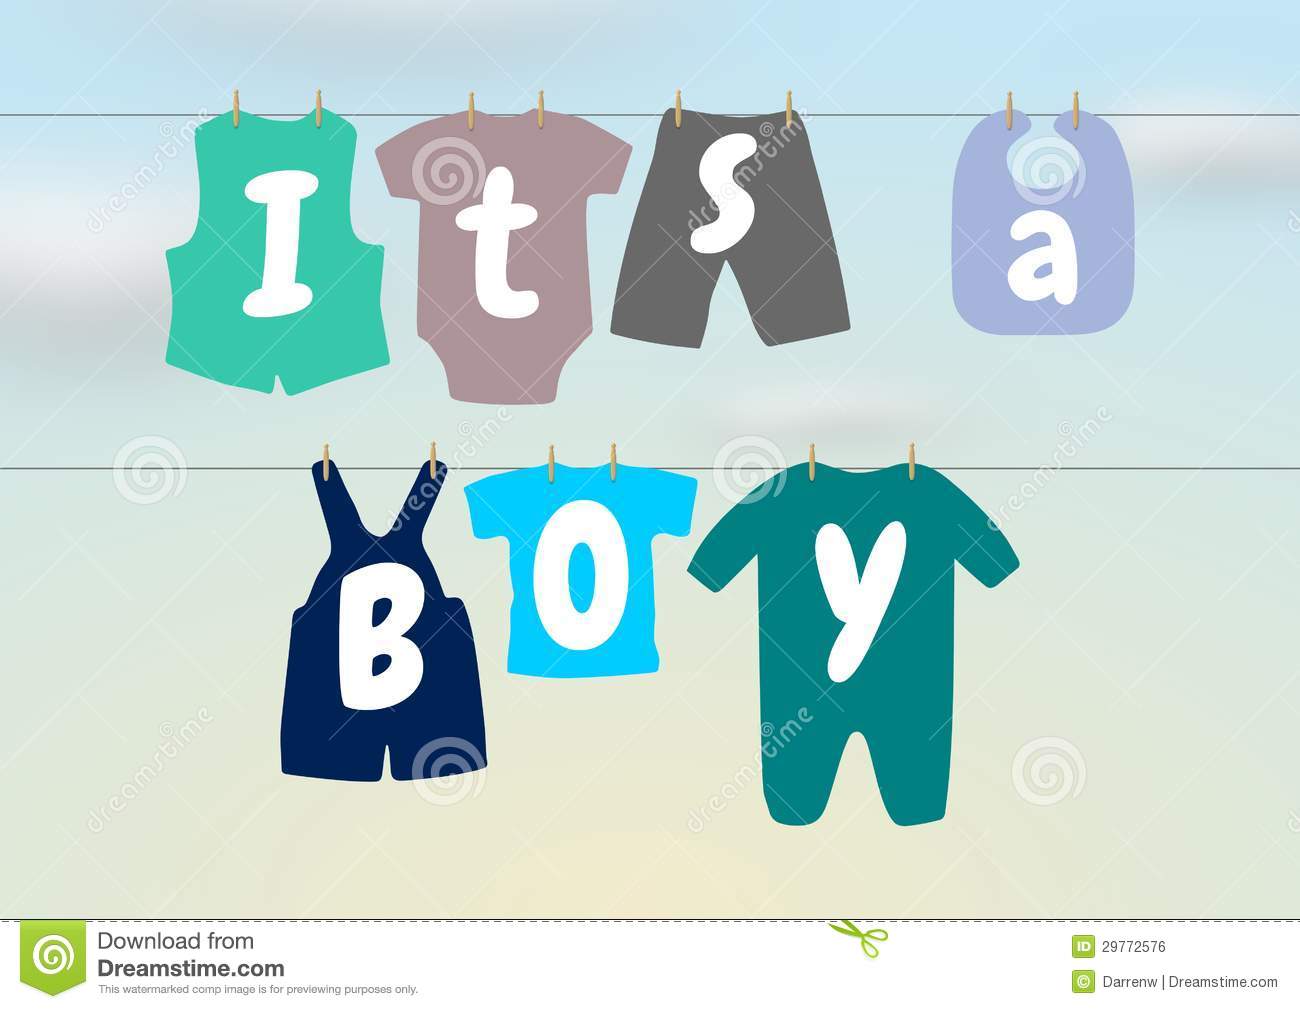 Of A Washing Line With Baby Clothes And Words Saying It S A Boy